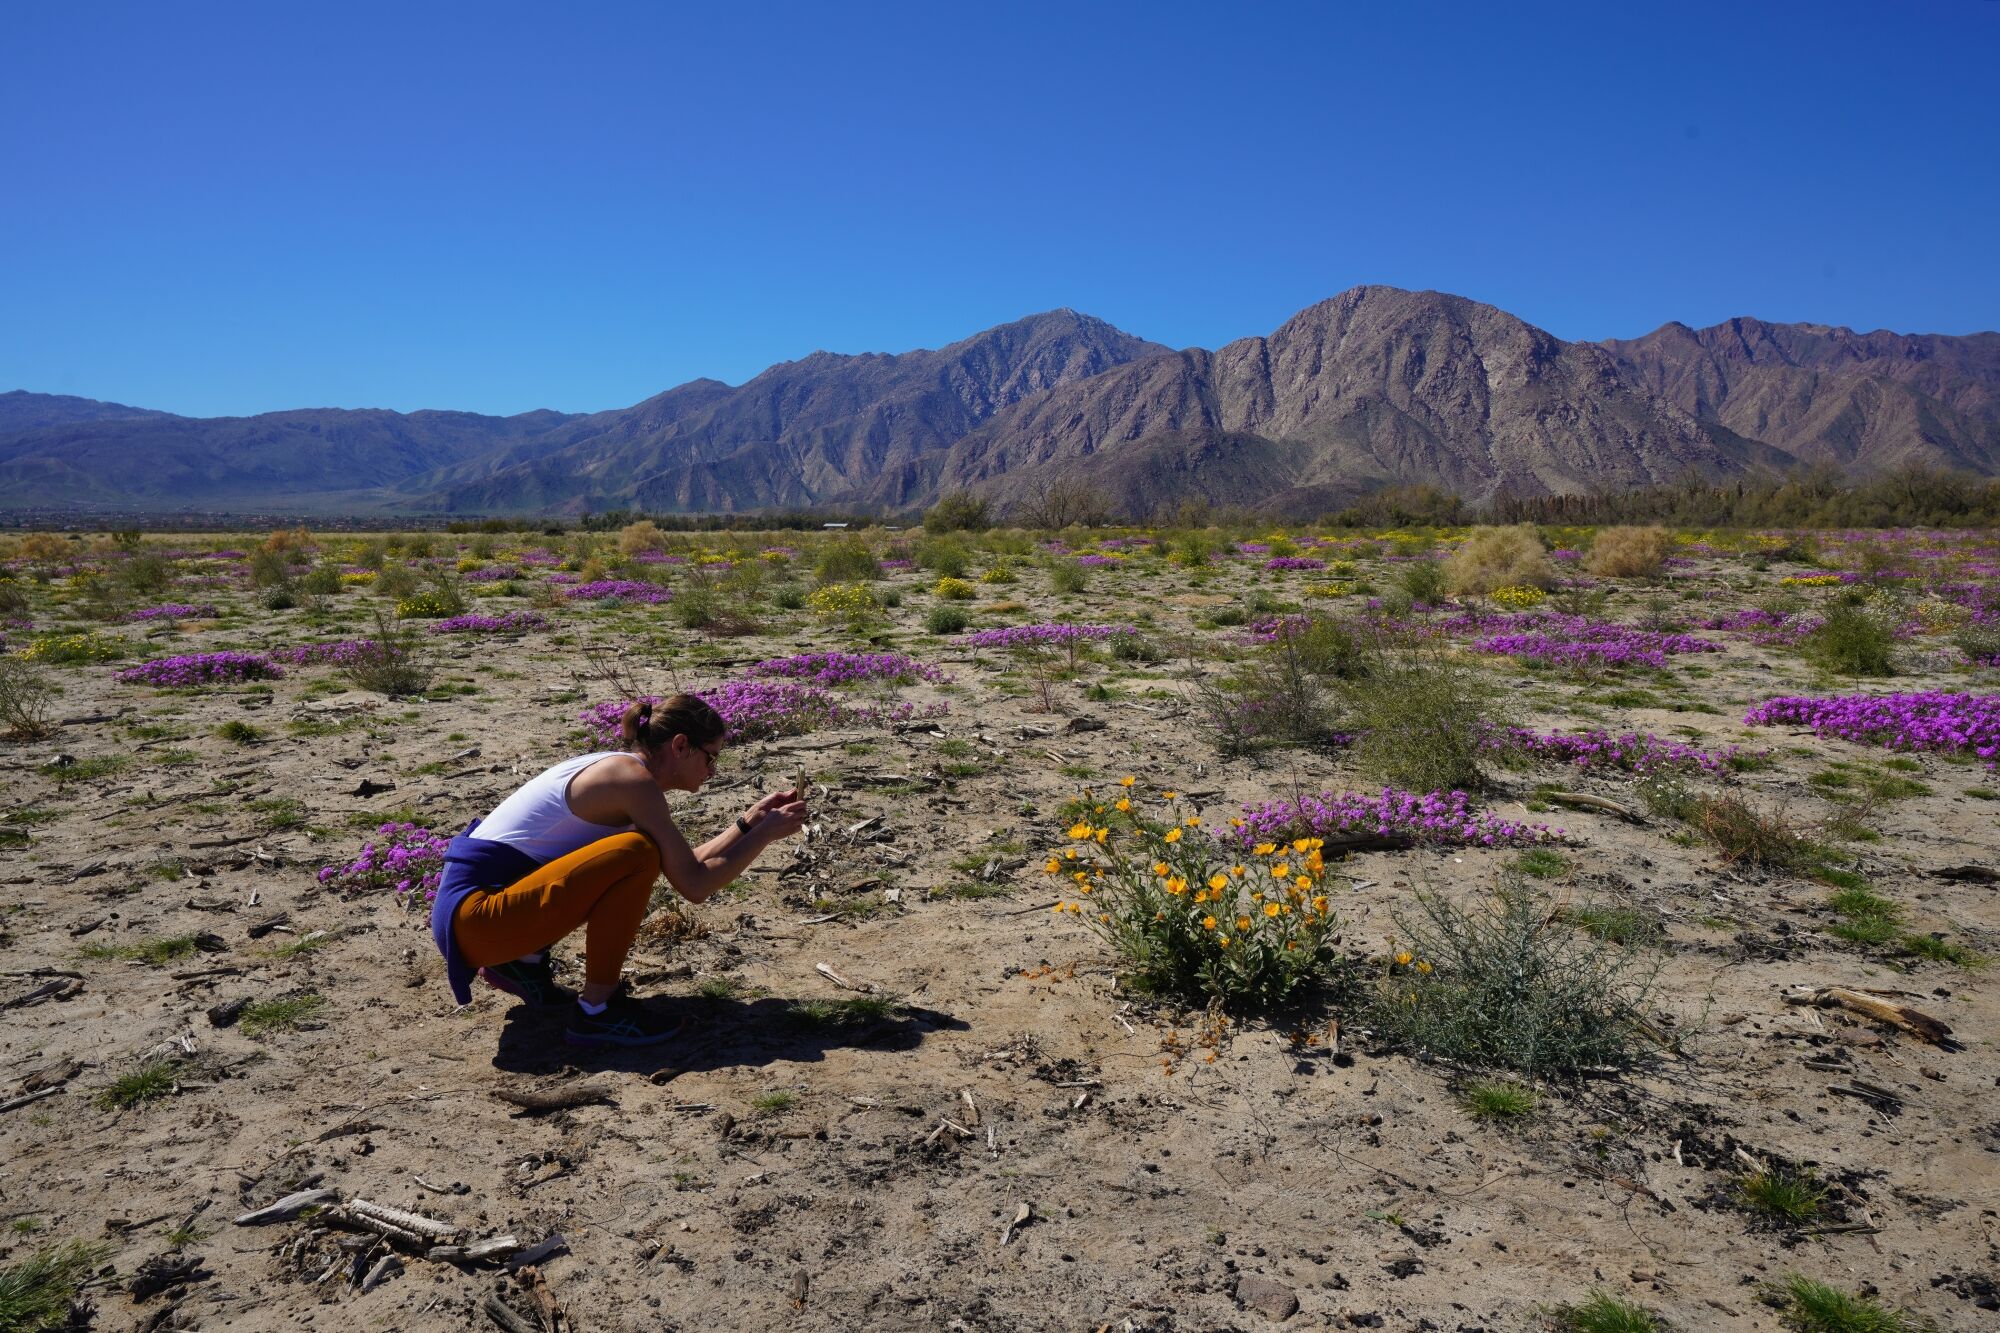 Jen Tokash from Los Angeles used her smartphone to take close-up photos at Anza-Borrego Desert State Park on Tuesday.